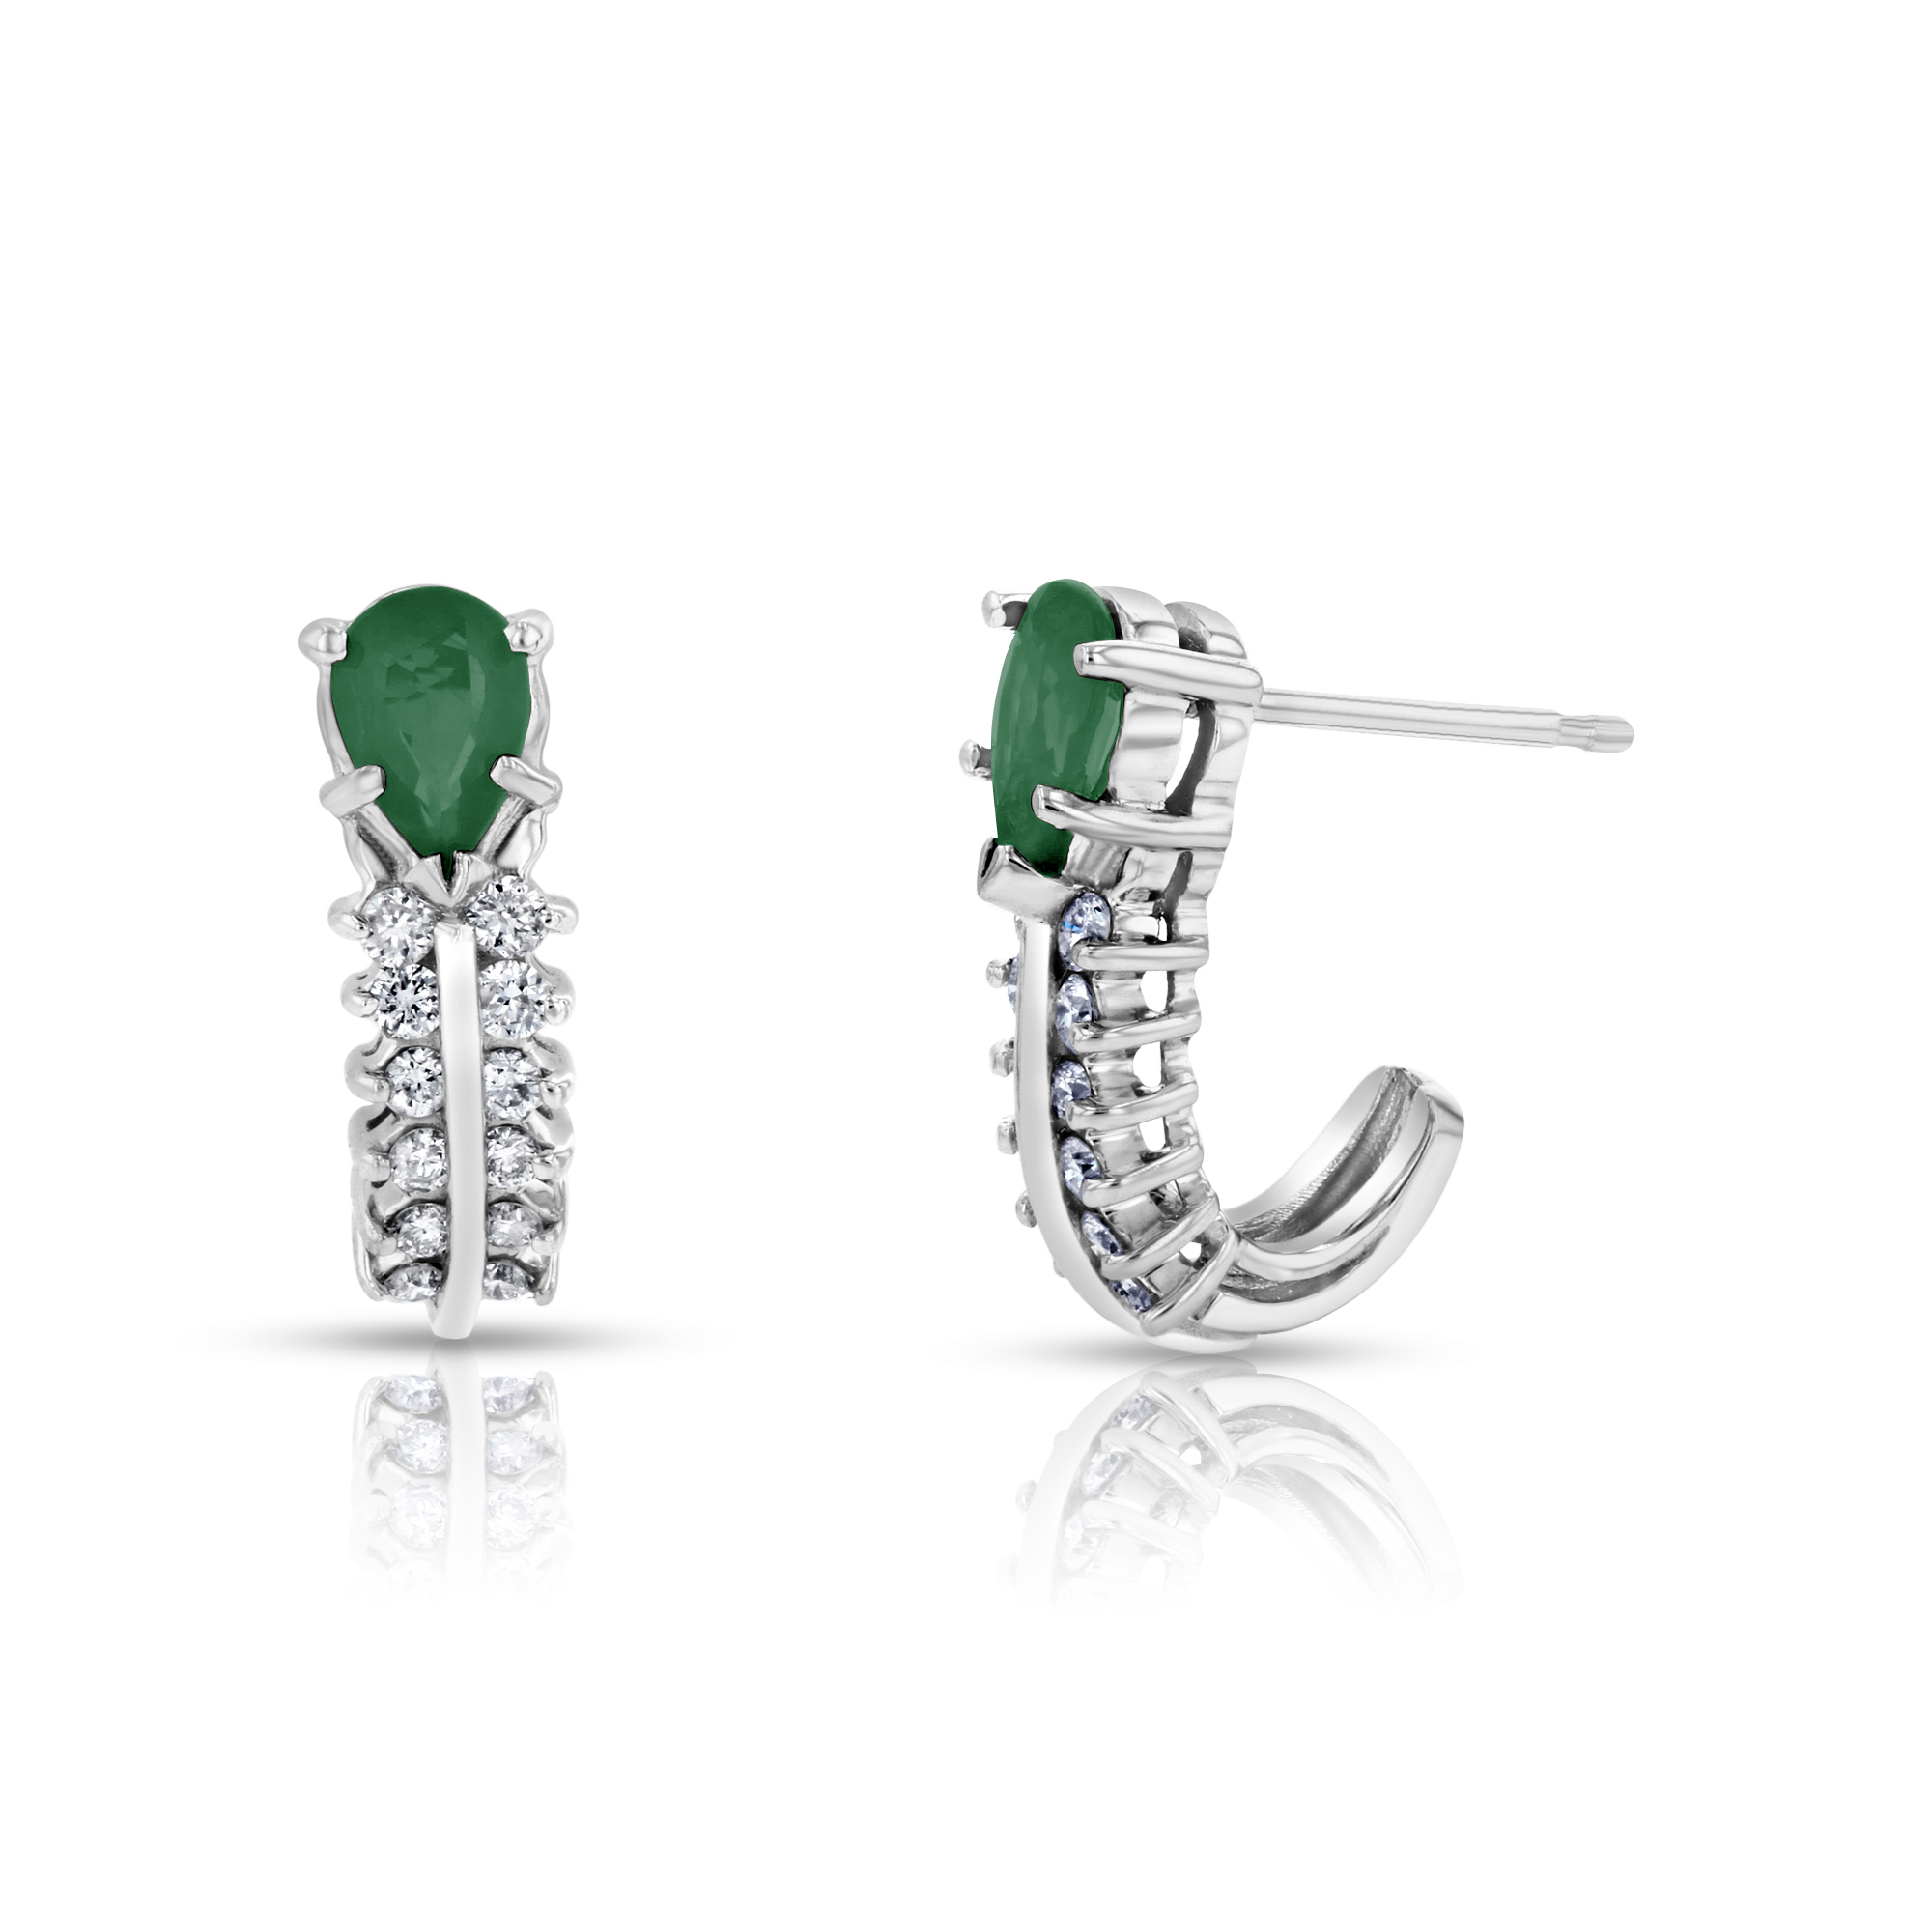 View 0.30ctw Diamonds and Emerald Earrings in 14k White Gold